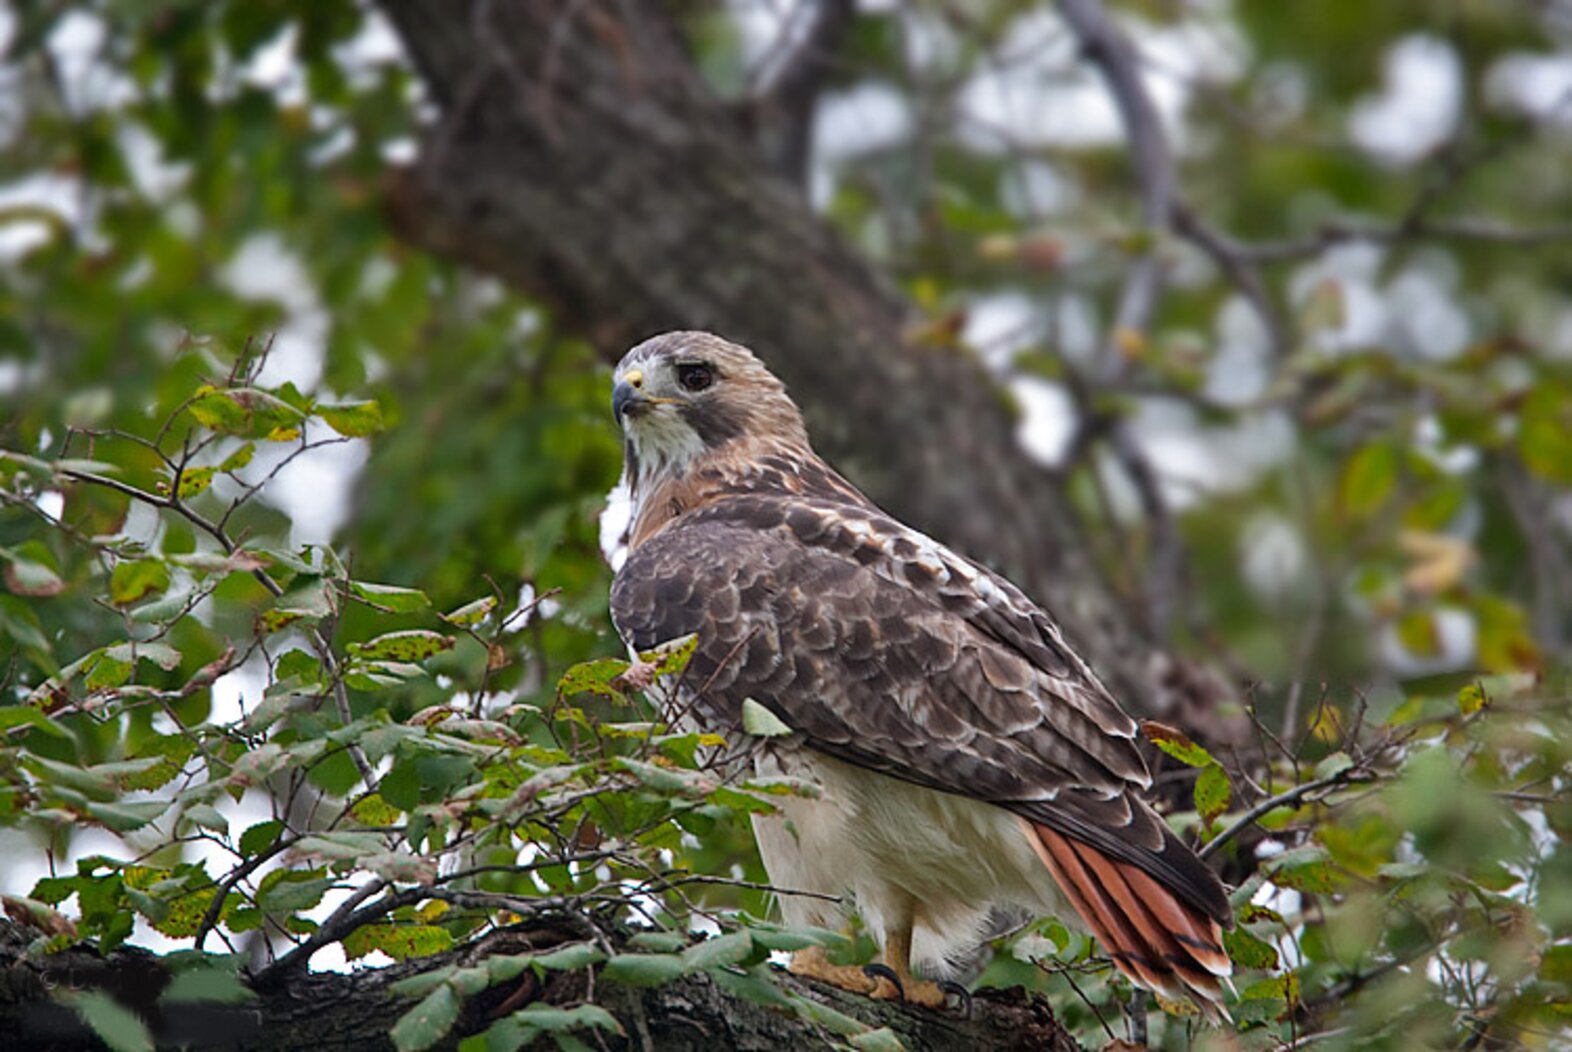 Pale Male surveys his territory in Central Park. Photo: <a href="https://www.lilibirds.com/" target="_blank">David Speiser</a>